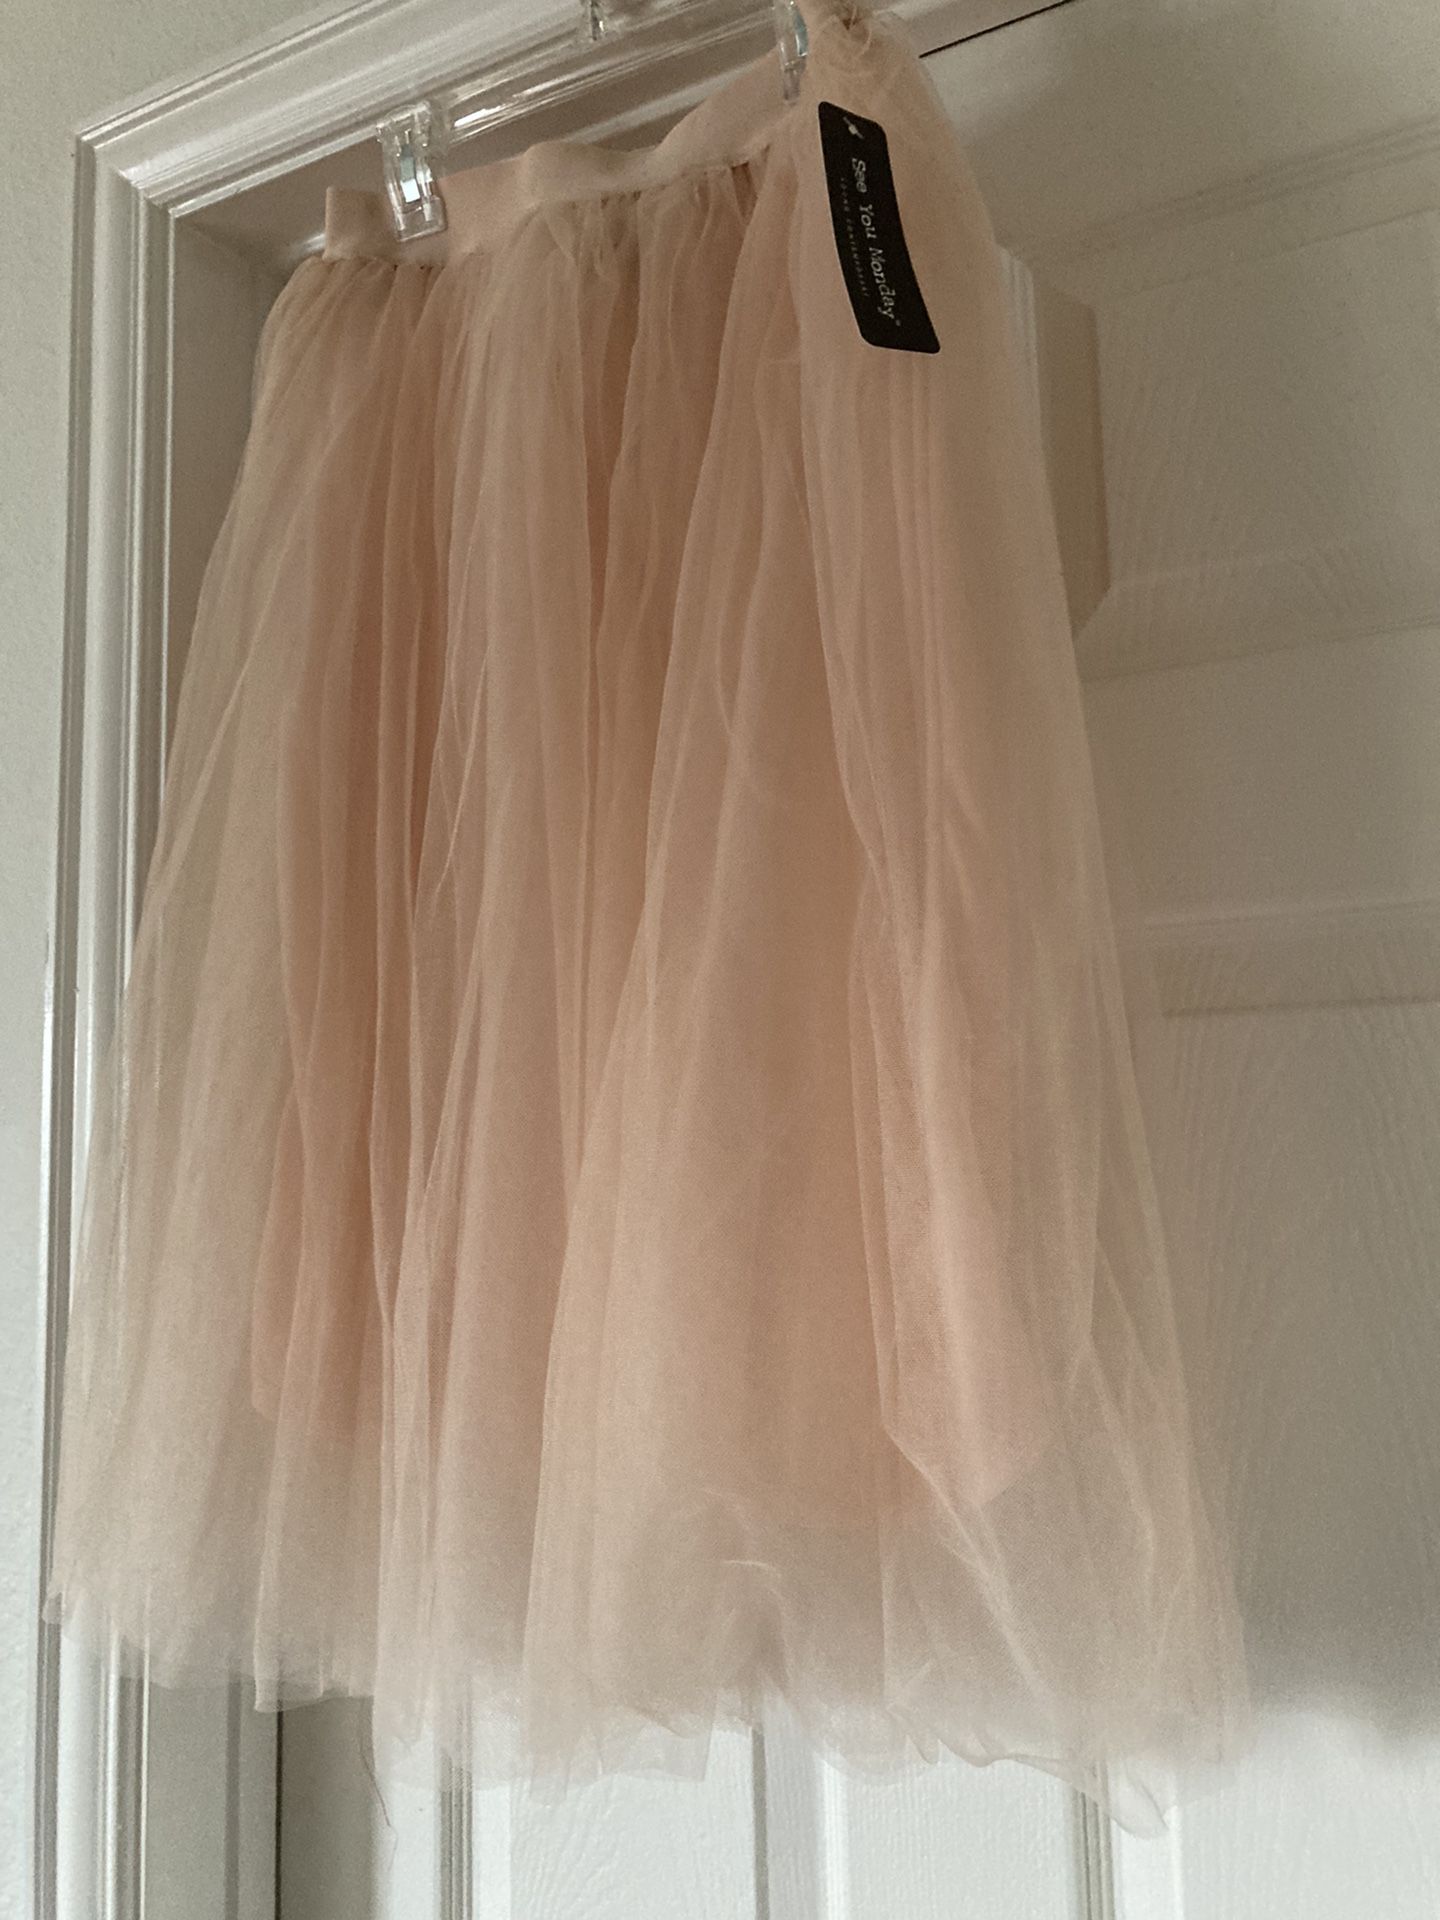 NEW Peach Rosa Tulle Skirt With Tags